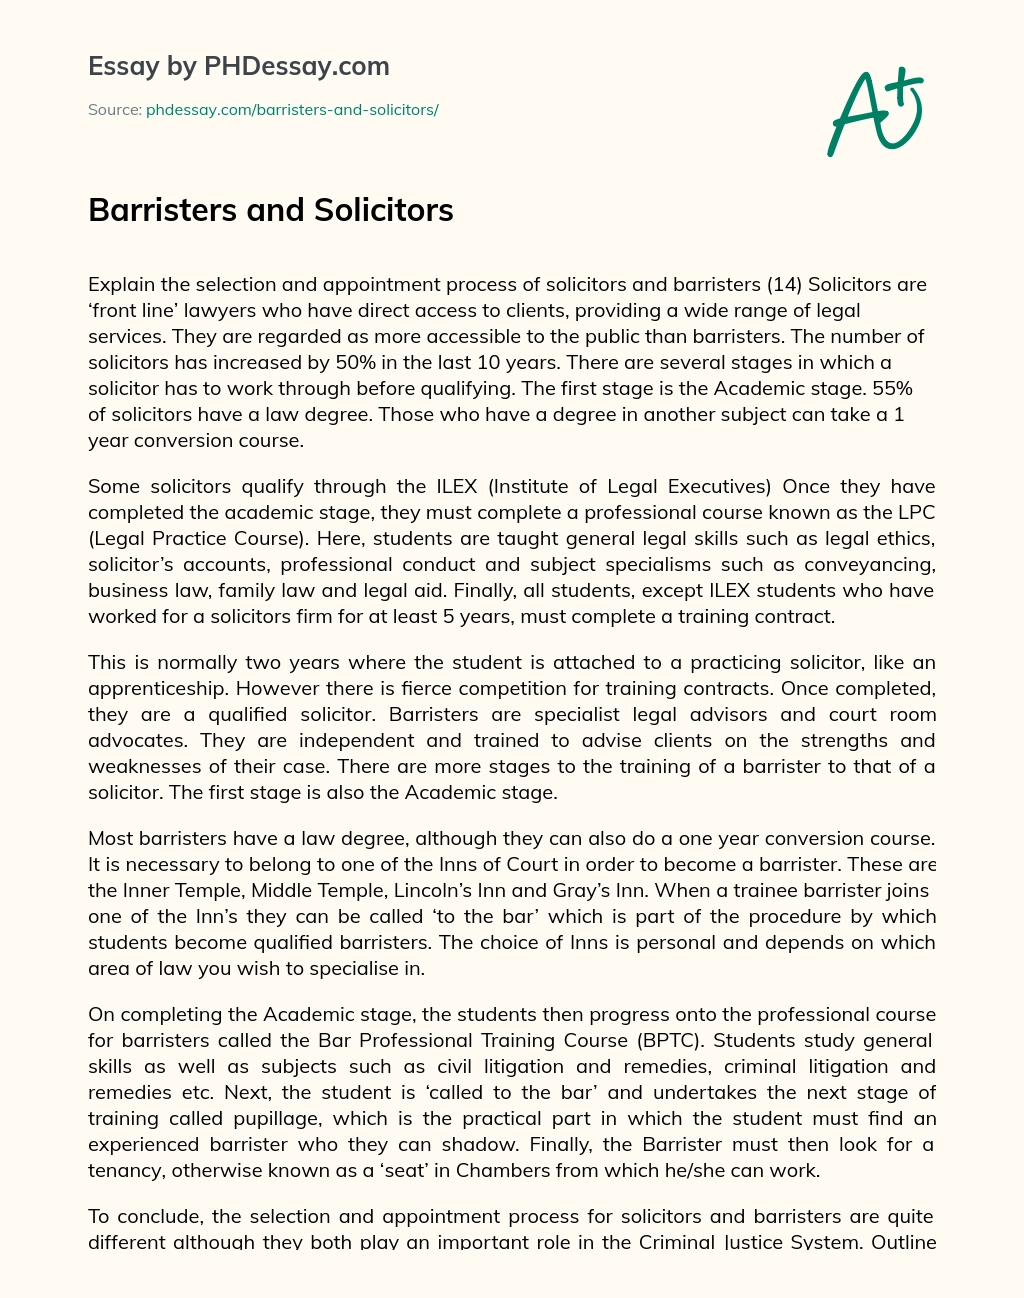 Barristers and Solicitors essay